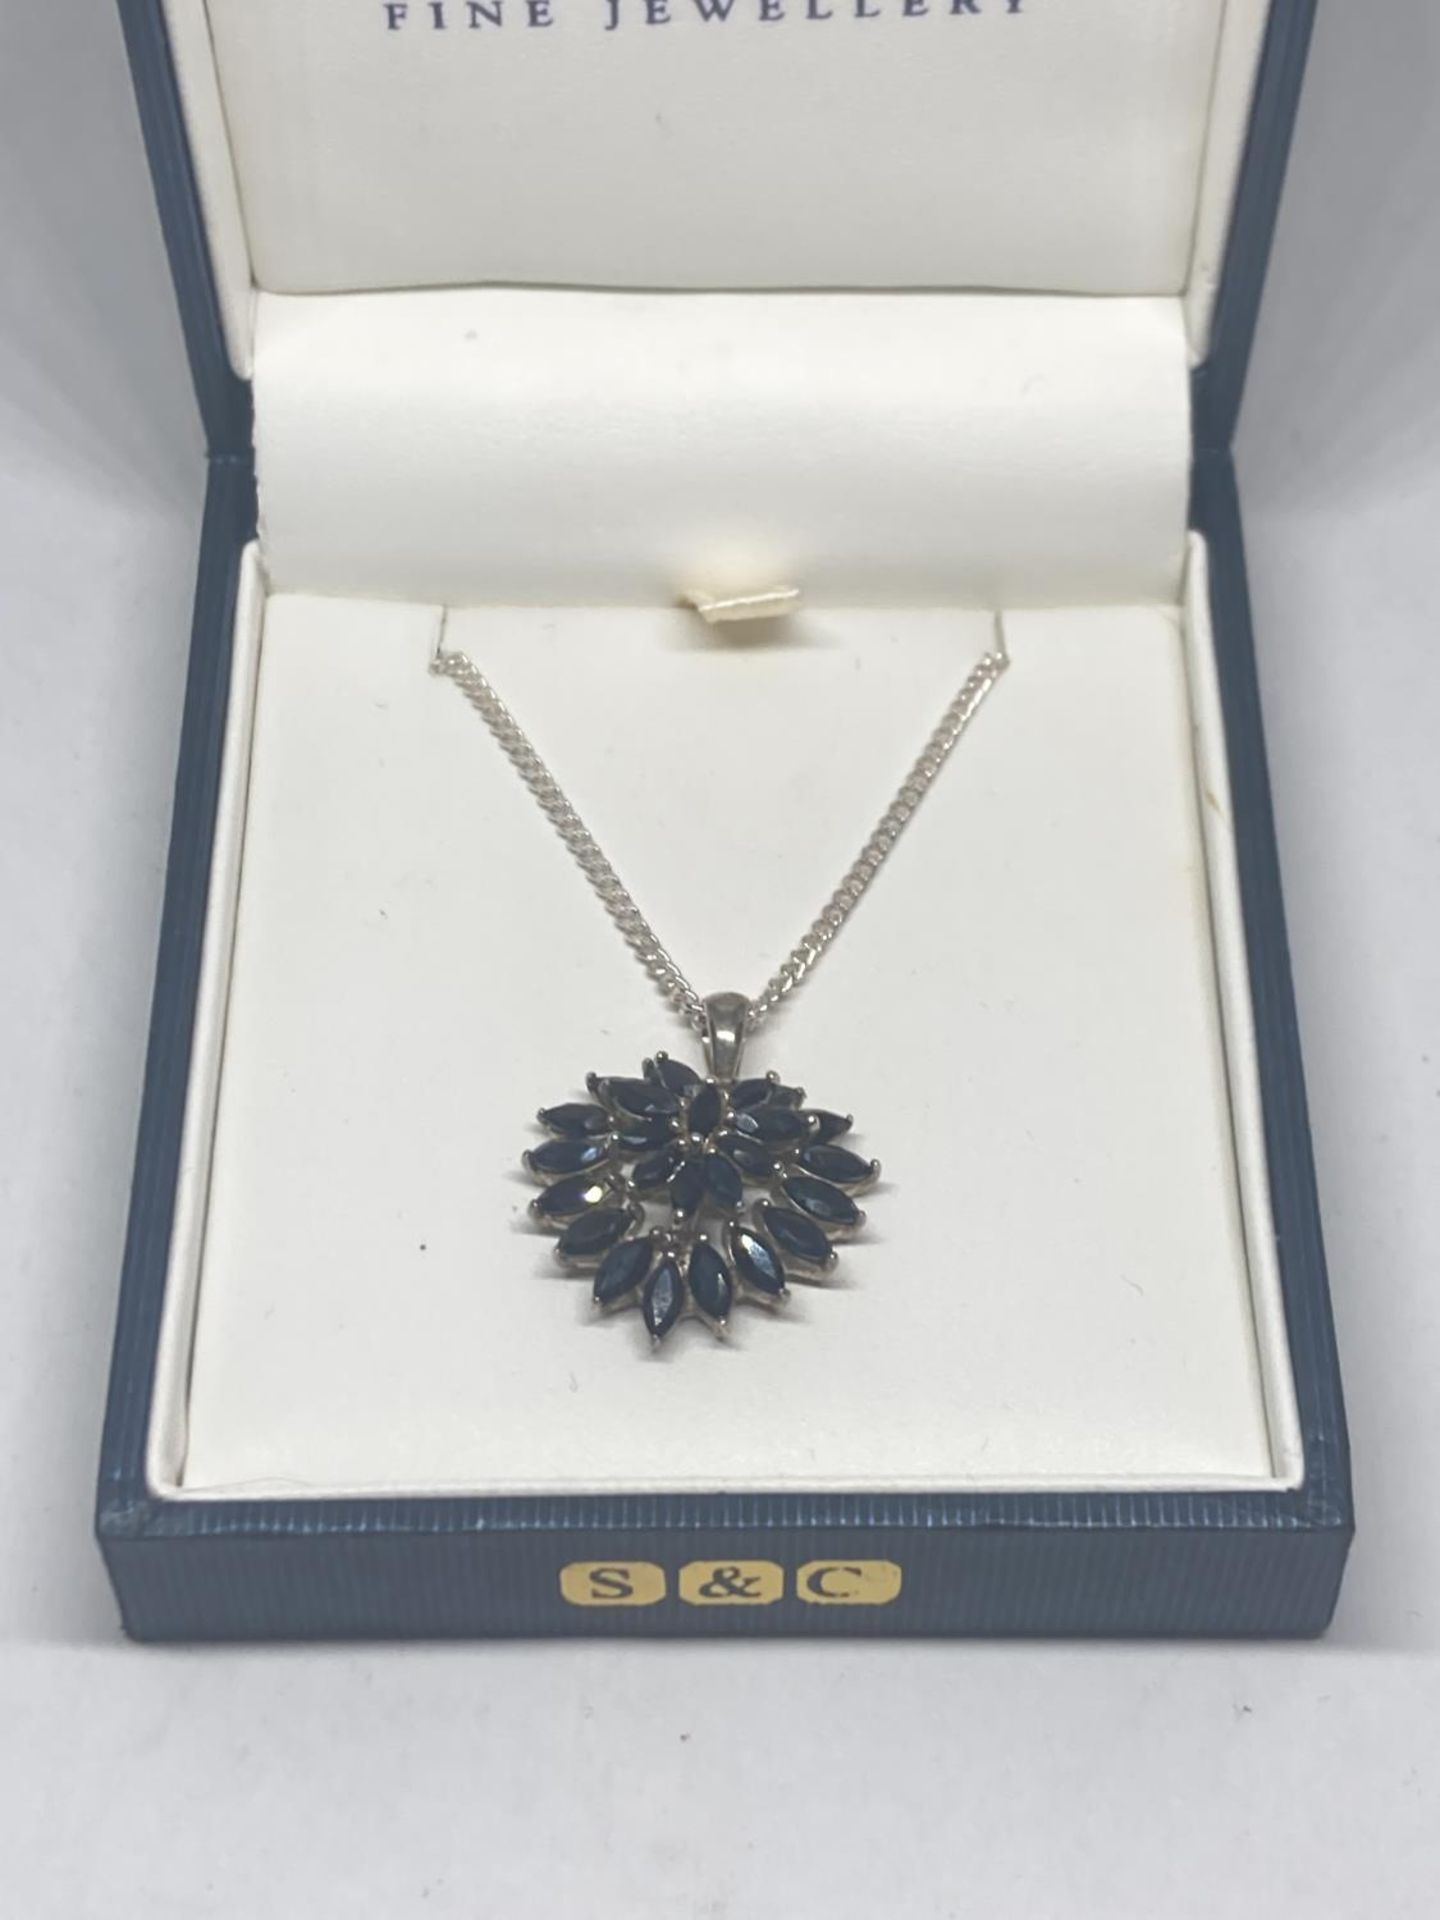 A MARKED SILVER NECKLACE WITH A BLACKSTONE PENDANT IN A PRESENTATION BOX - Image 2 of 6